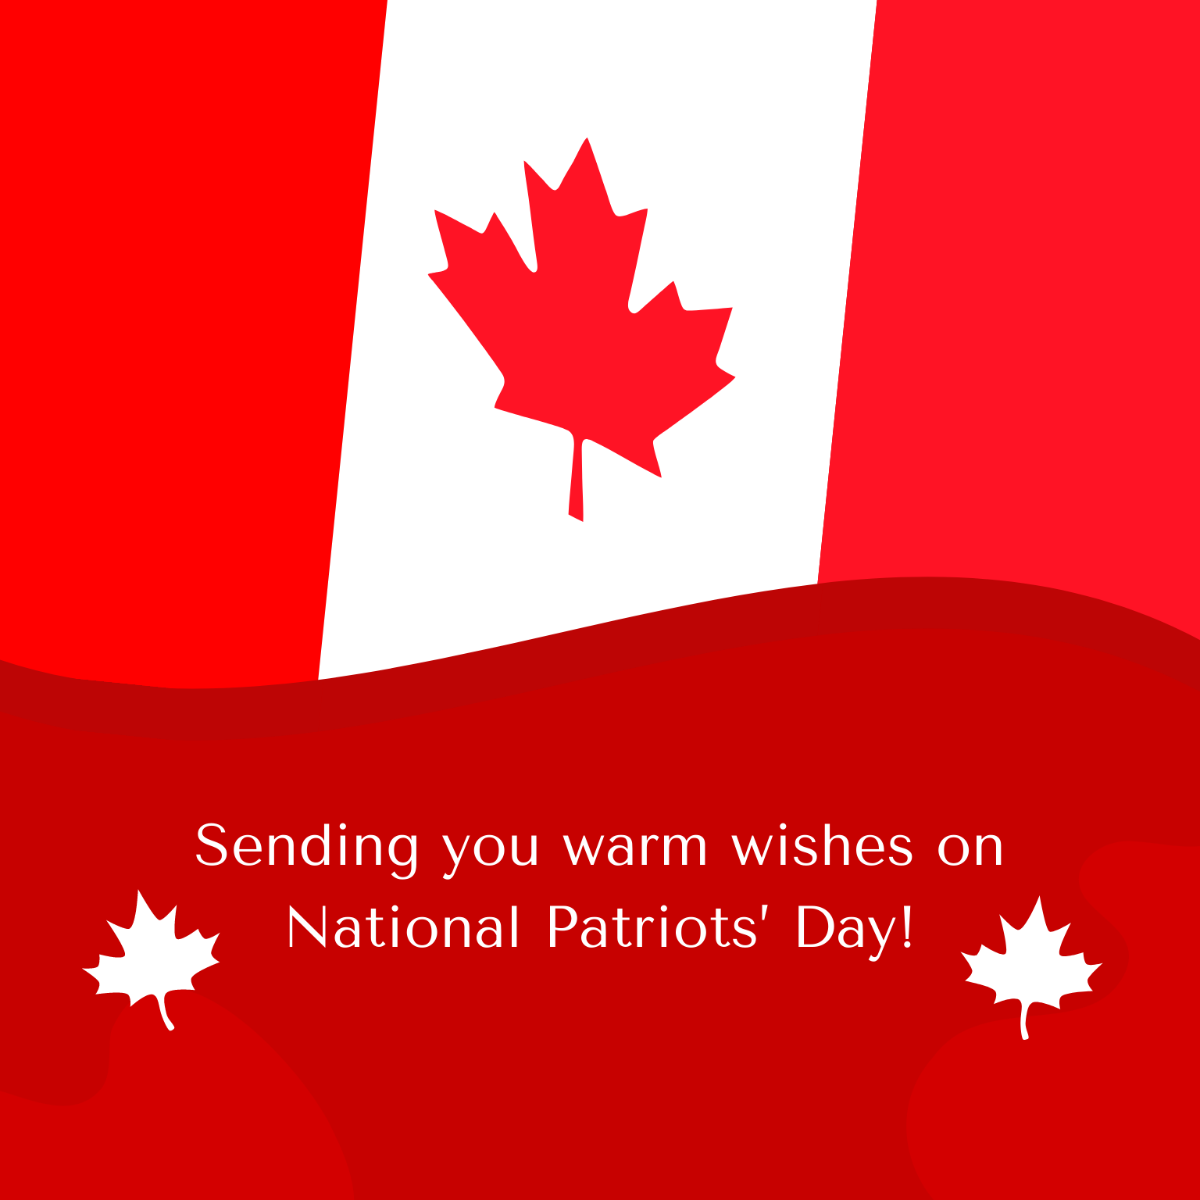 Free National Patriots' Day Wishes Vector Template